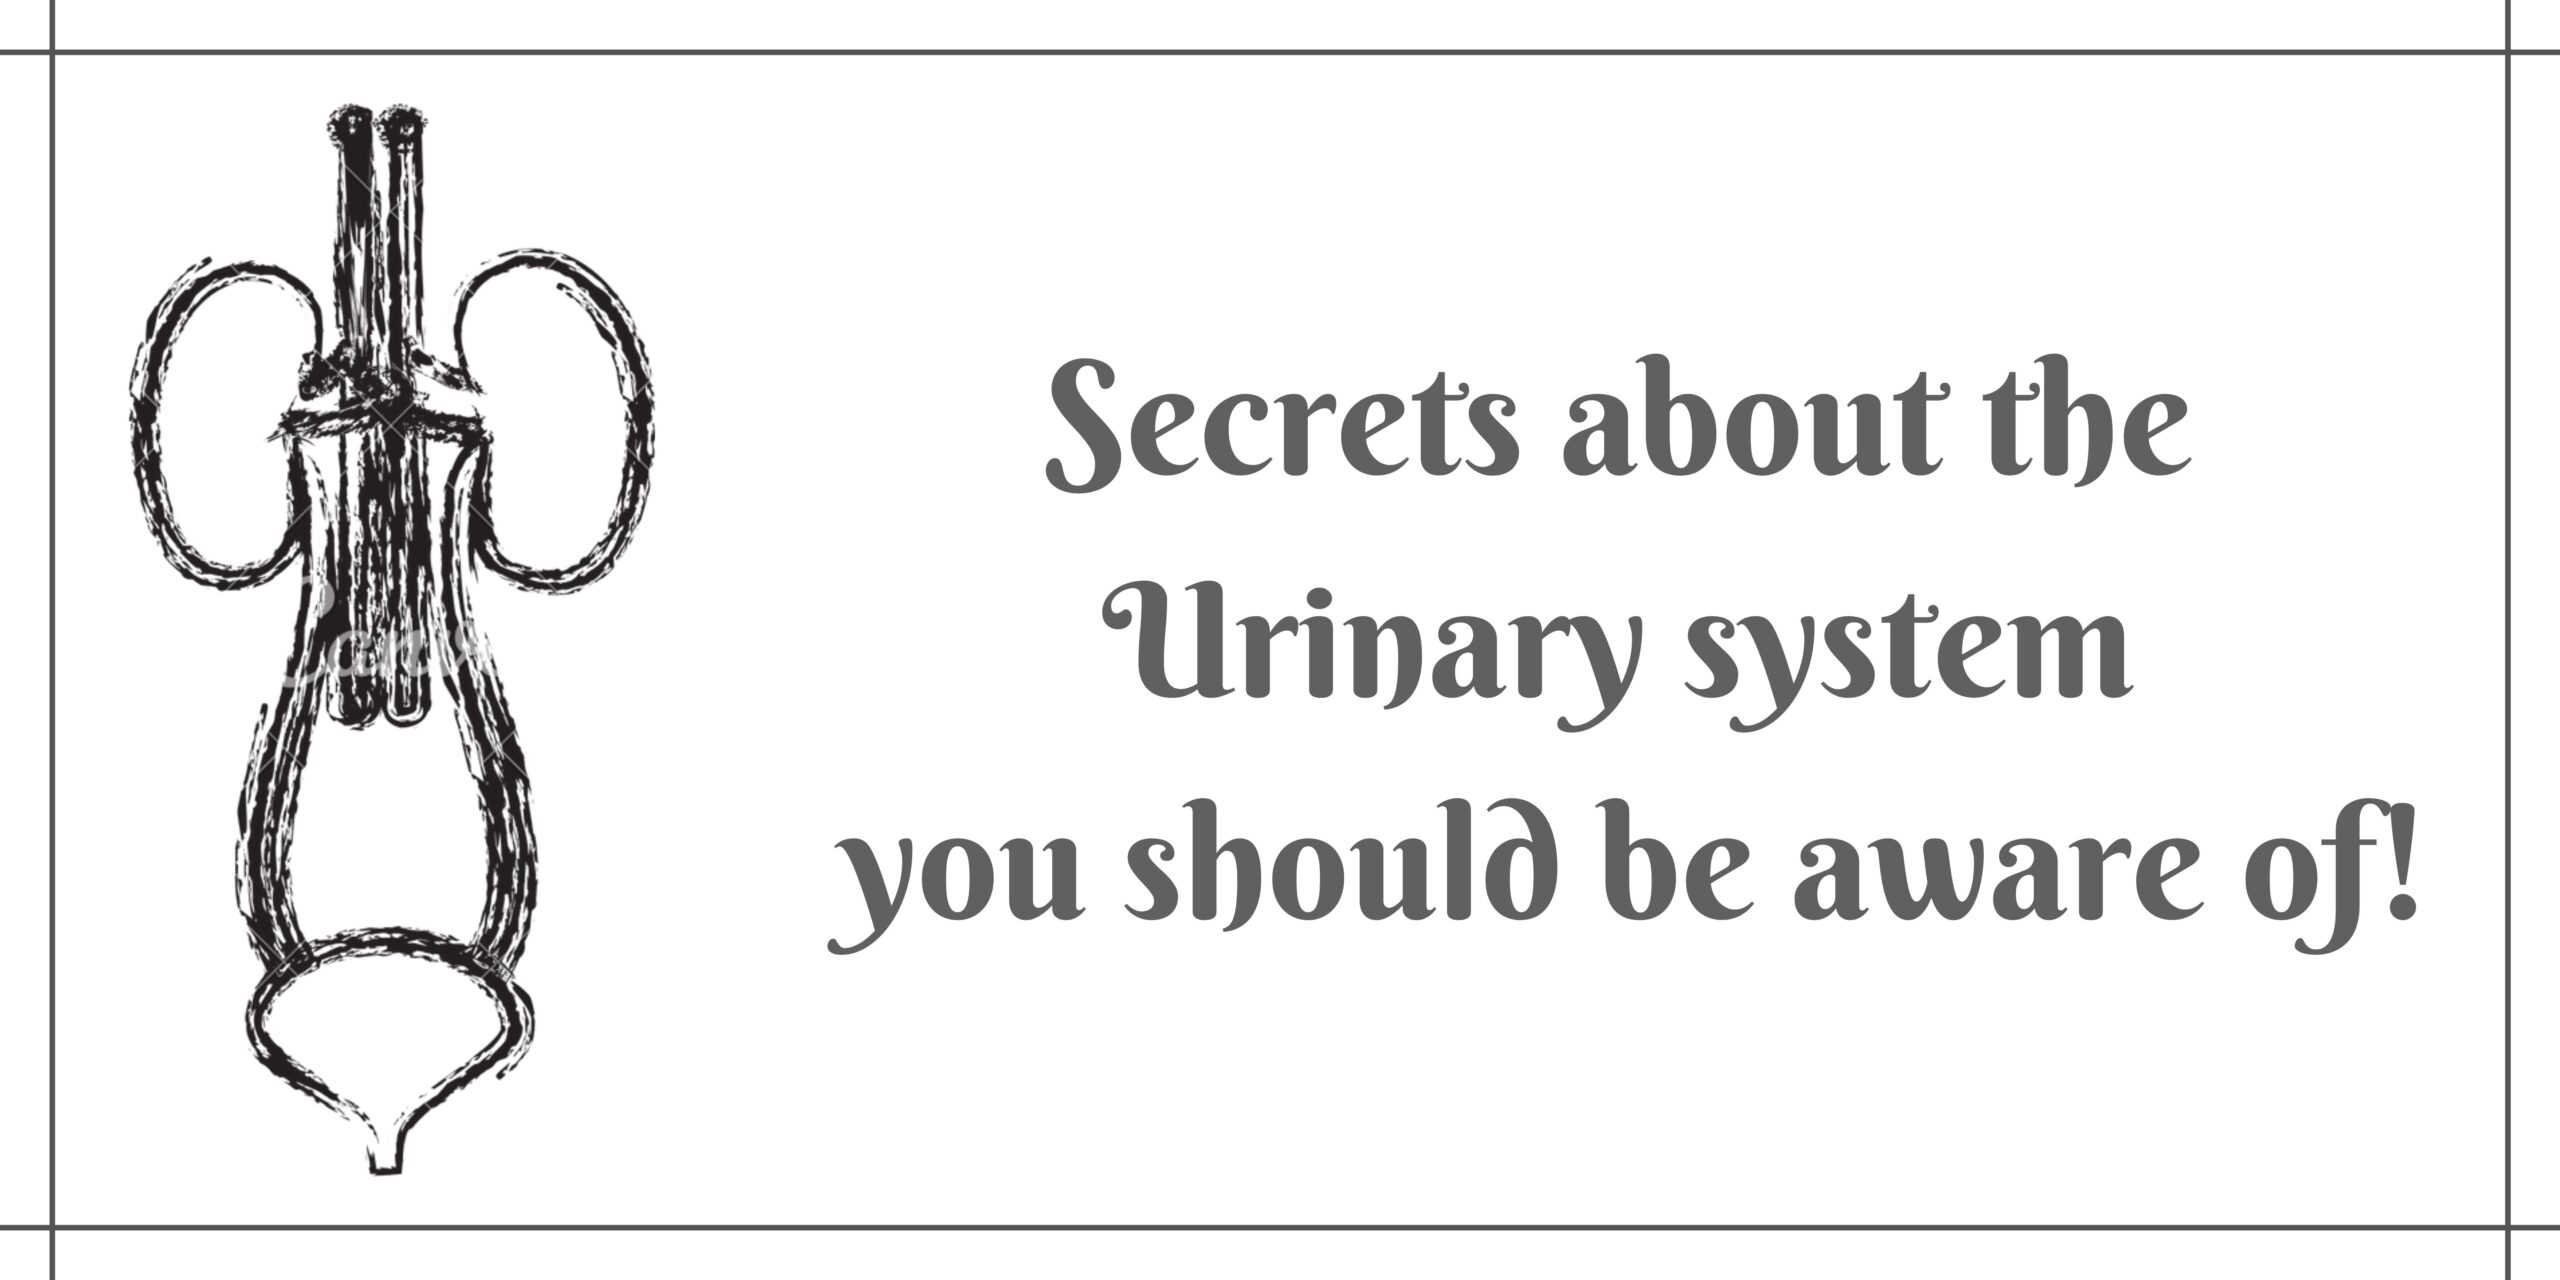 Secrets about the Urinary system you should be aware of!